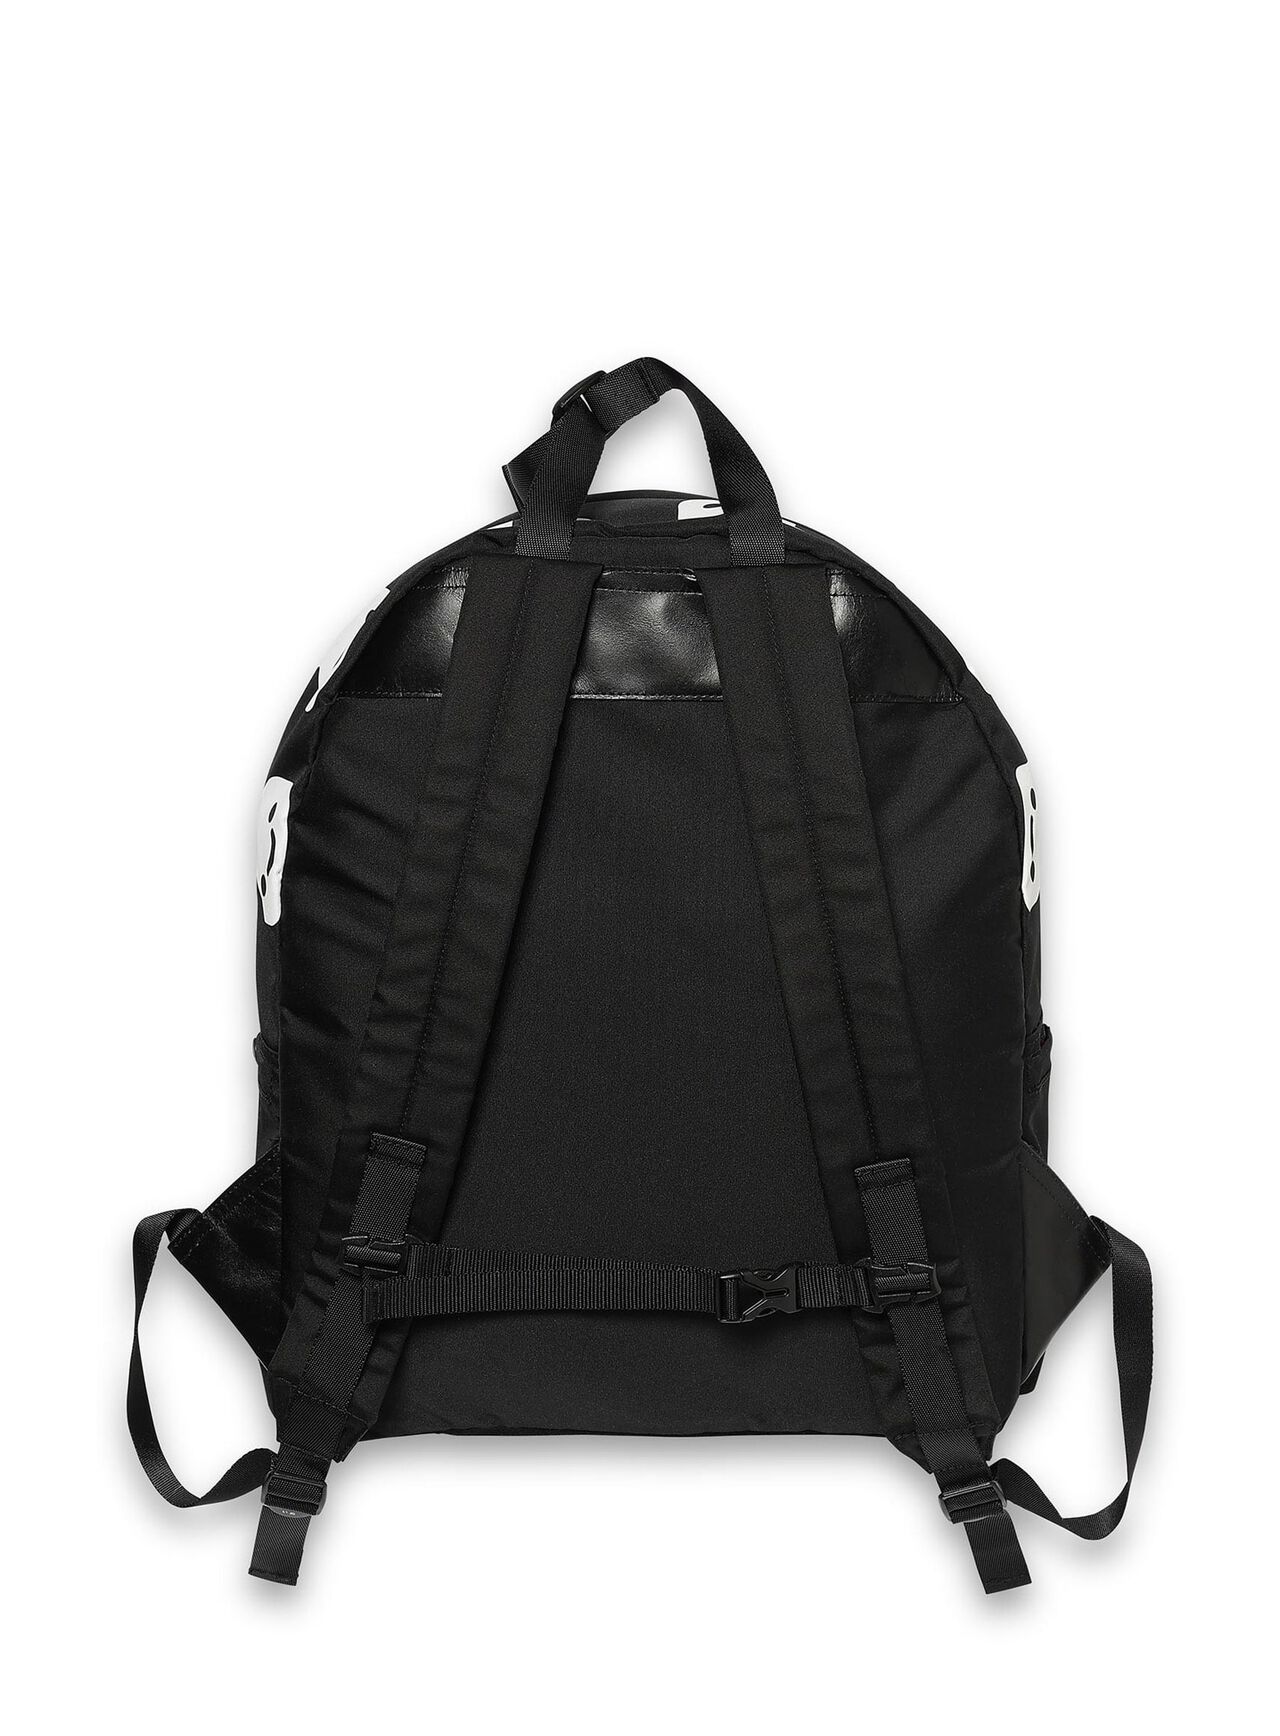 CUNE backpack L in Cordura R with leather bottom,ONE, large image number 1